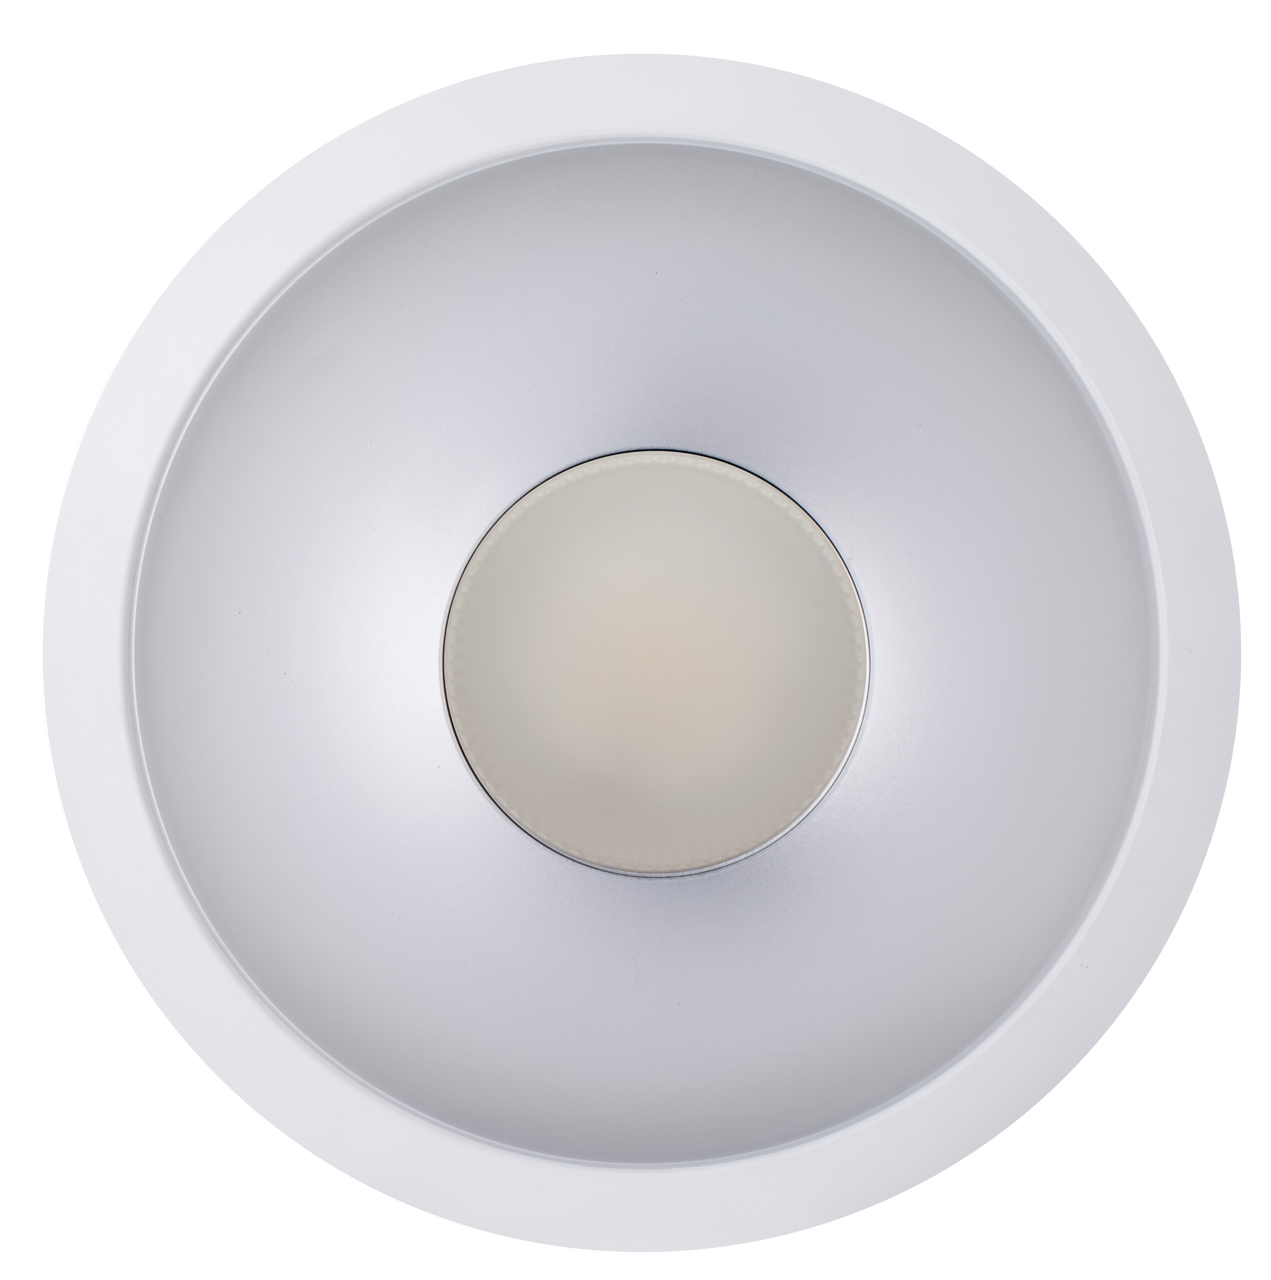 10 inch LED Commercial down light - inside view